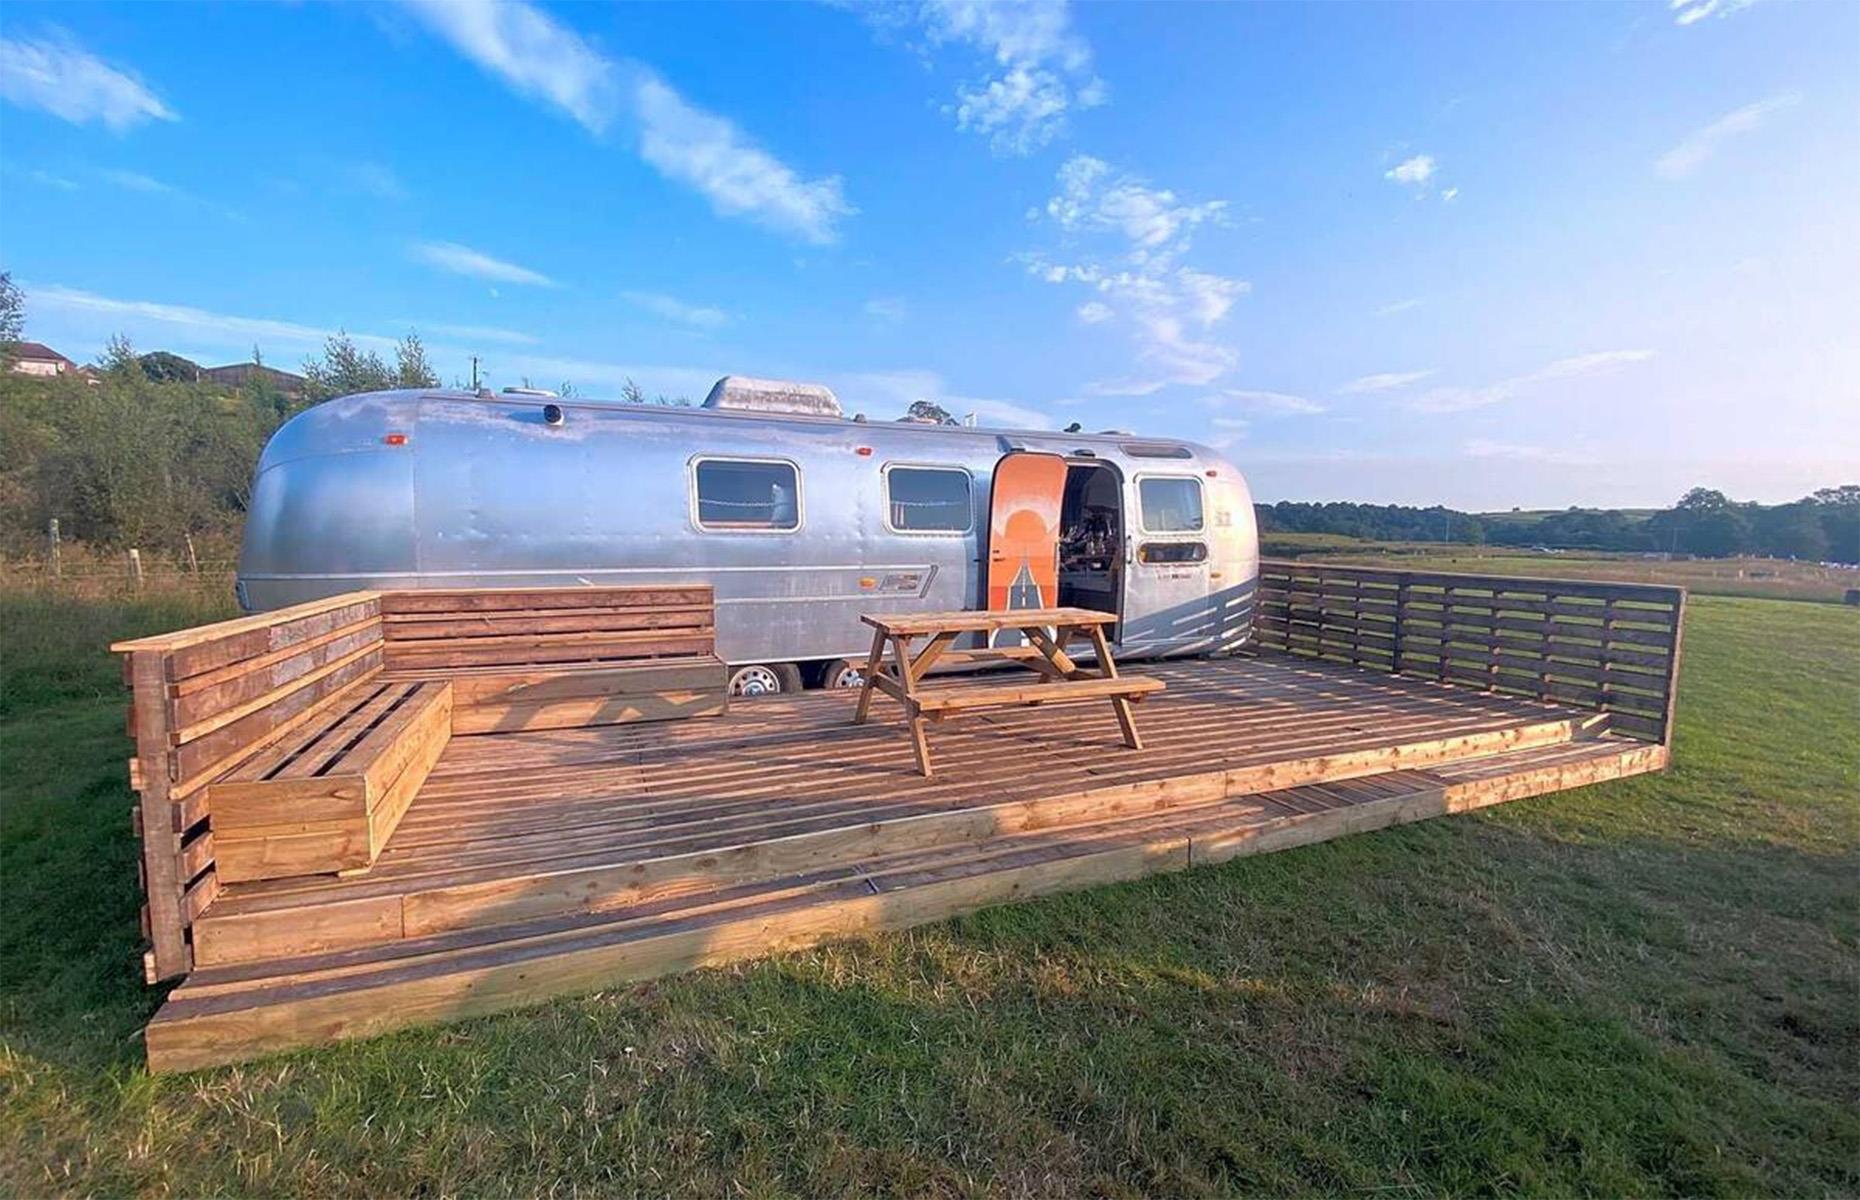 <p>Big Bertha, as this 1973 Airstream has affectionately been dubbed, truly lives up to her name with a sleeping capacity of up to six people.</p>  <p>Situated in the English countryside overlooking Croglin Beck, the Airstream <a href="https://www.airbnb.co.uk/rooms/52216553">Airbnb</a> has been sleekly renovated to afford all the comforts of a true ‘glamping’ experience.</p>